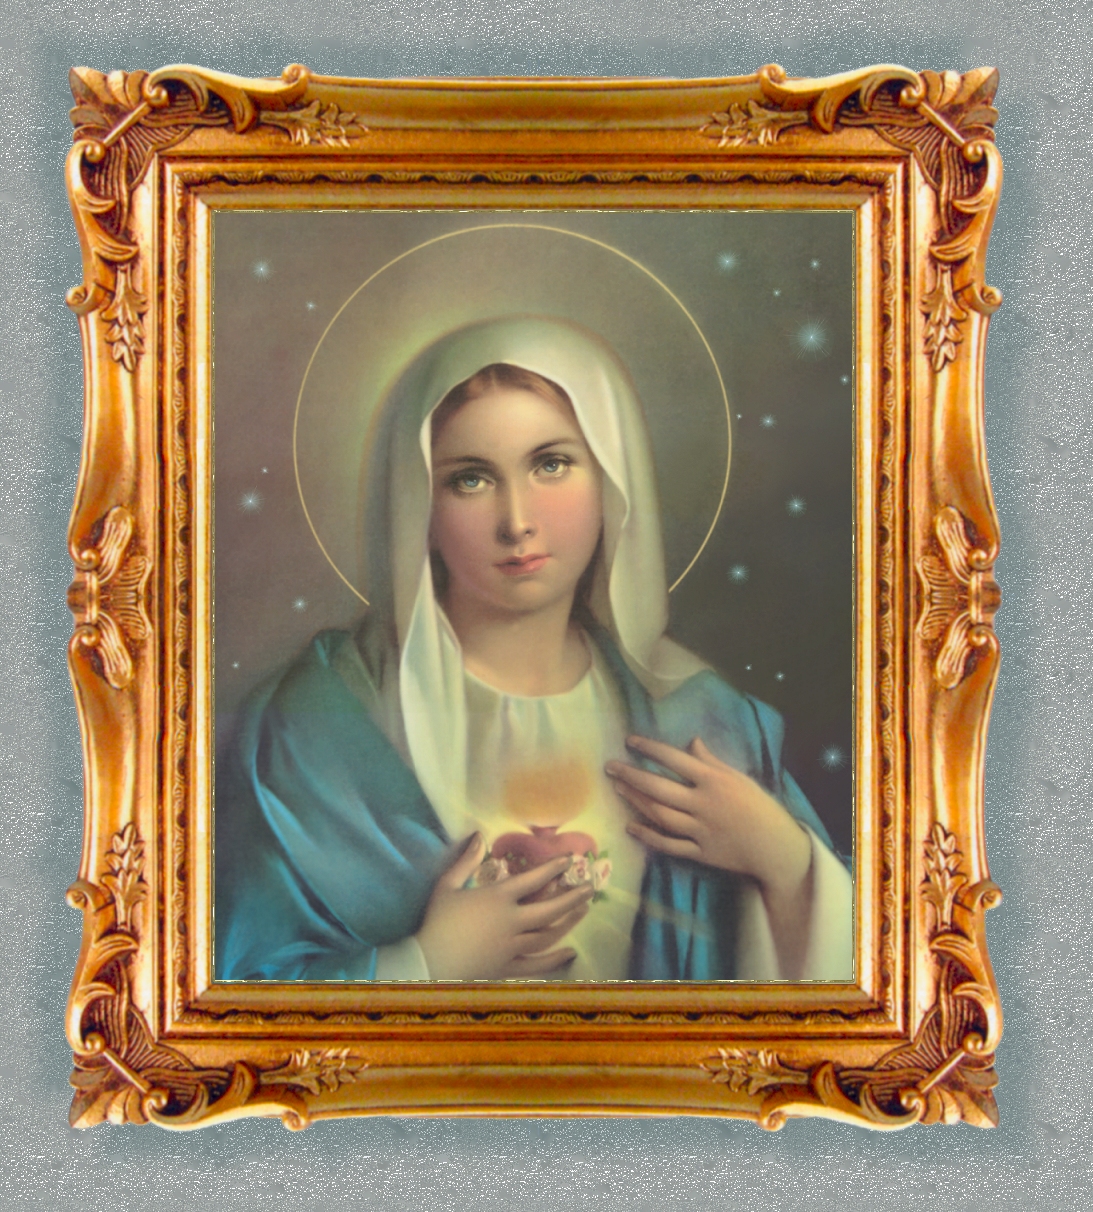 FRAMED IMAGE OF THE IMMACULATA